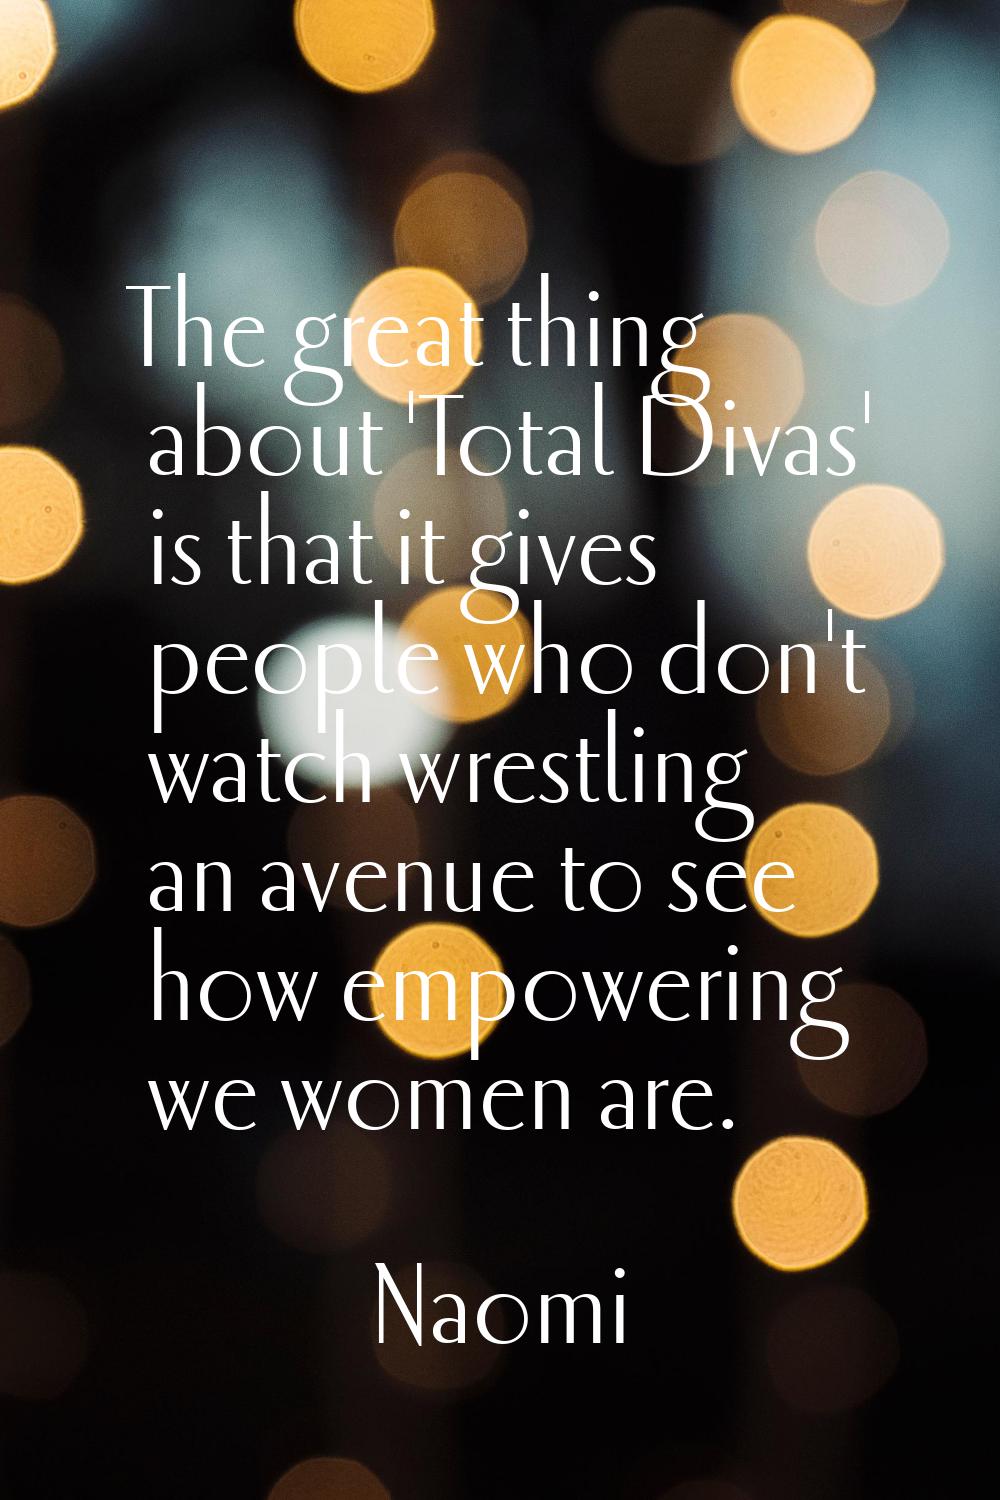 The great thing about 'Total Divas' is that it gives people who don't watch wrestling an avenue to 